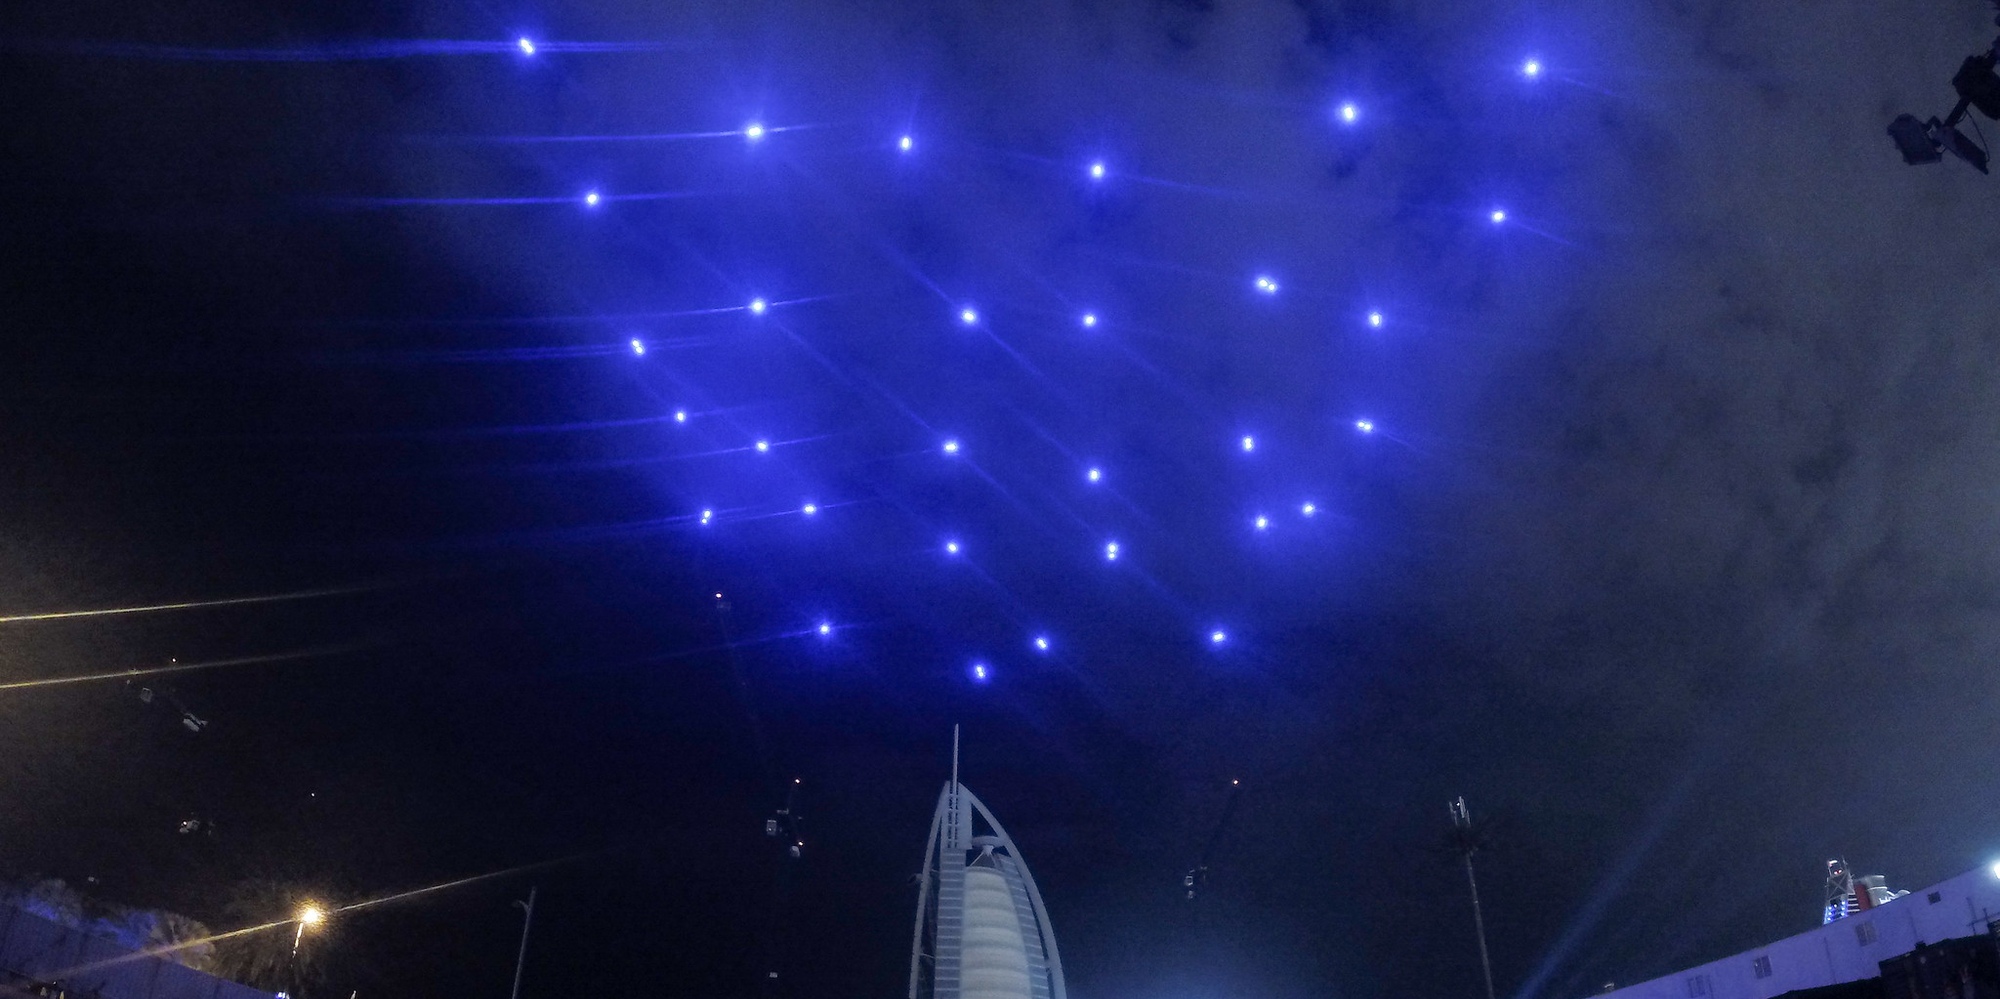 Spaxels in Dubai - UAE National Day 2014